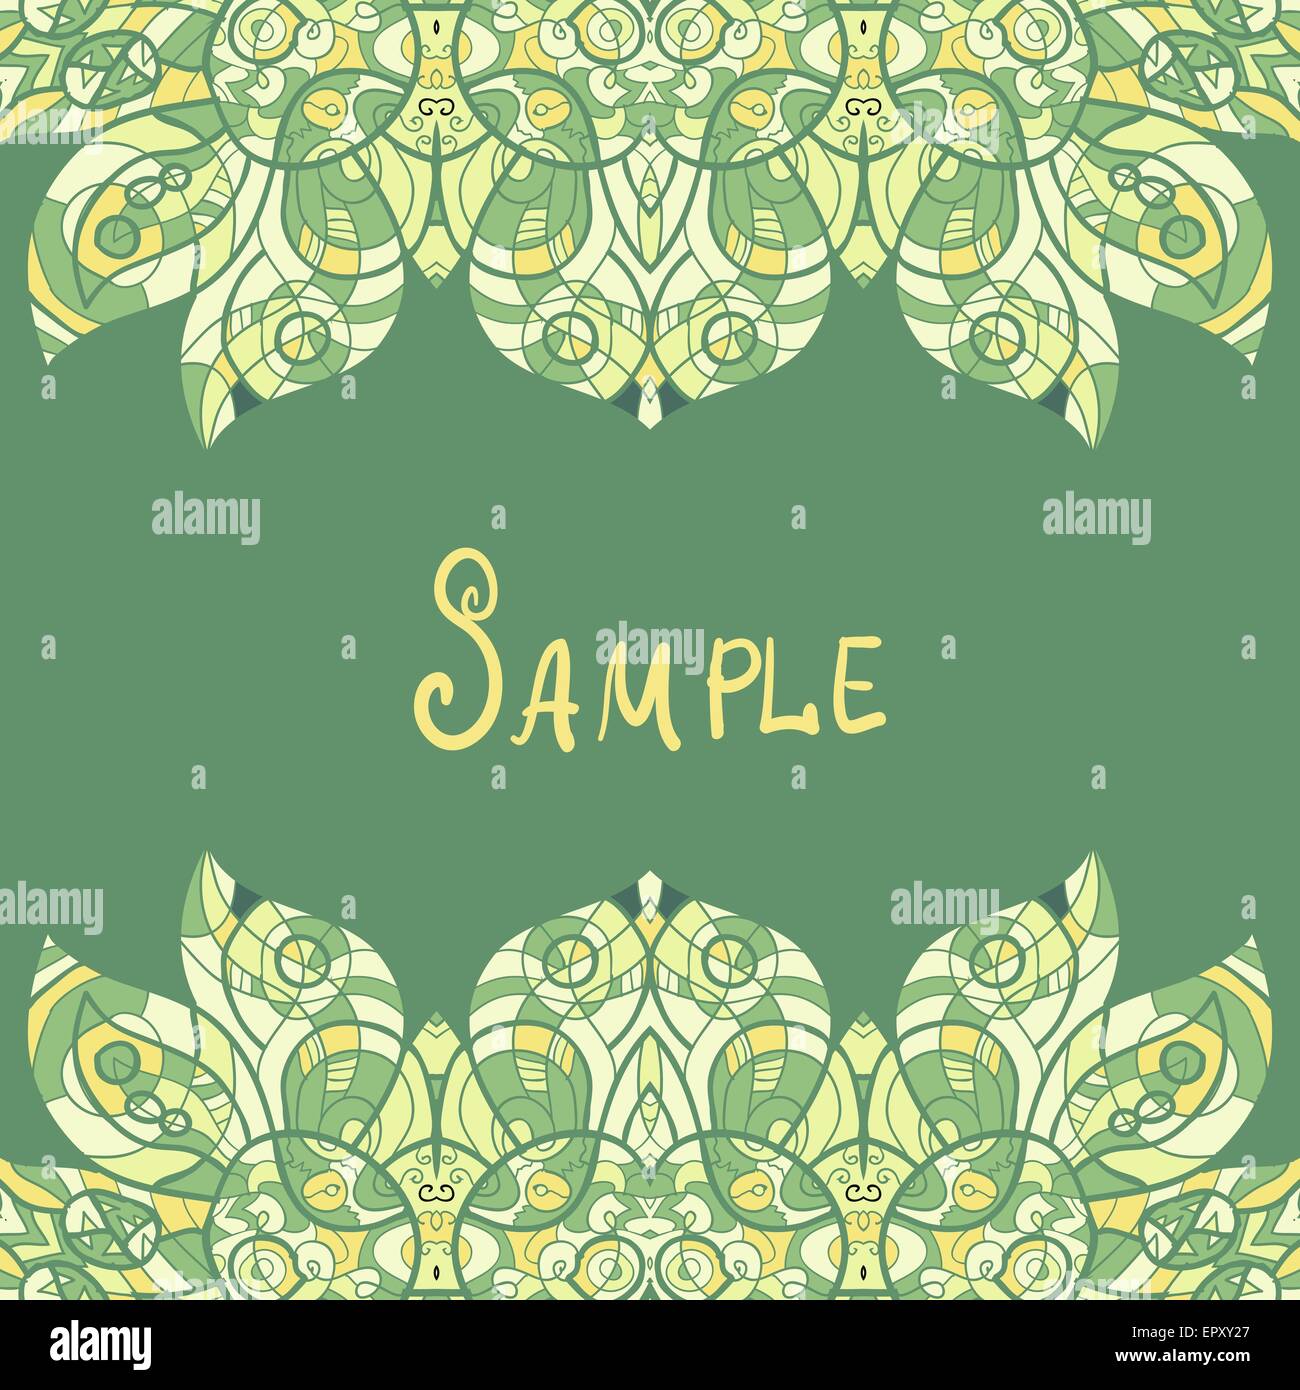 Card template for print design. Ethnic paisley ornament Stock Vector